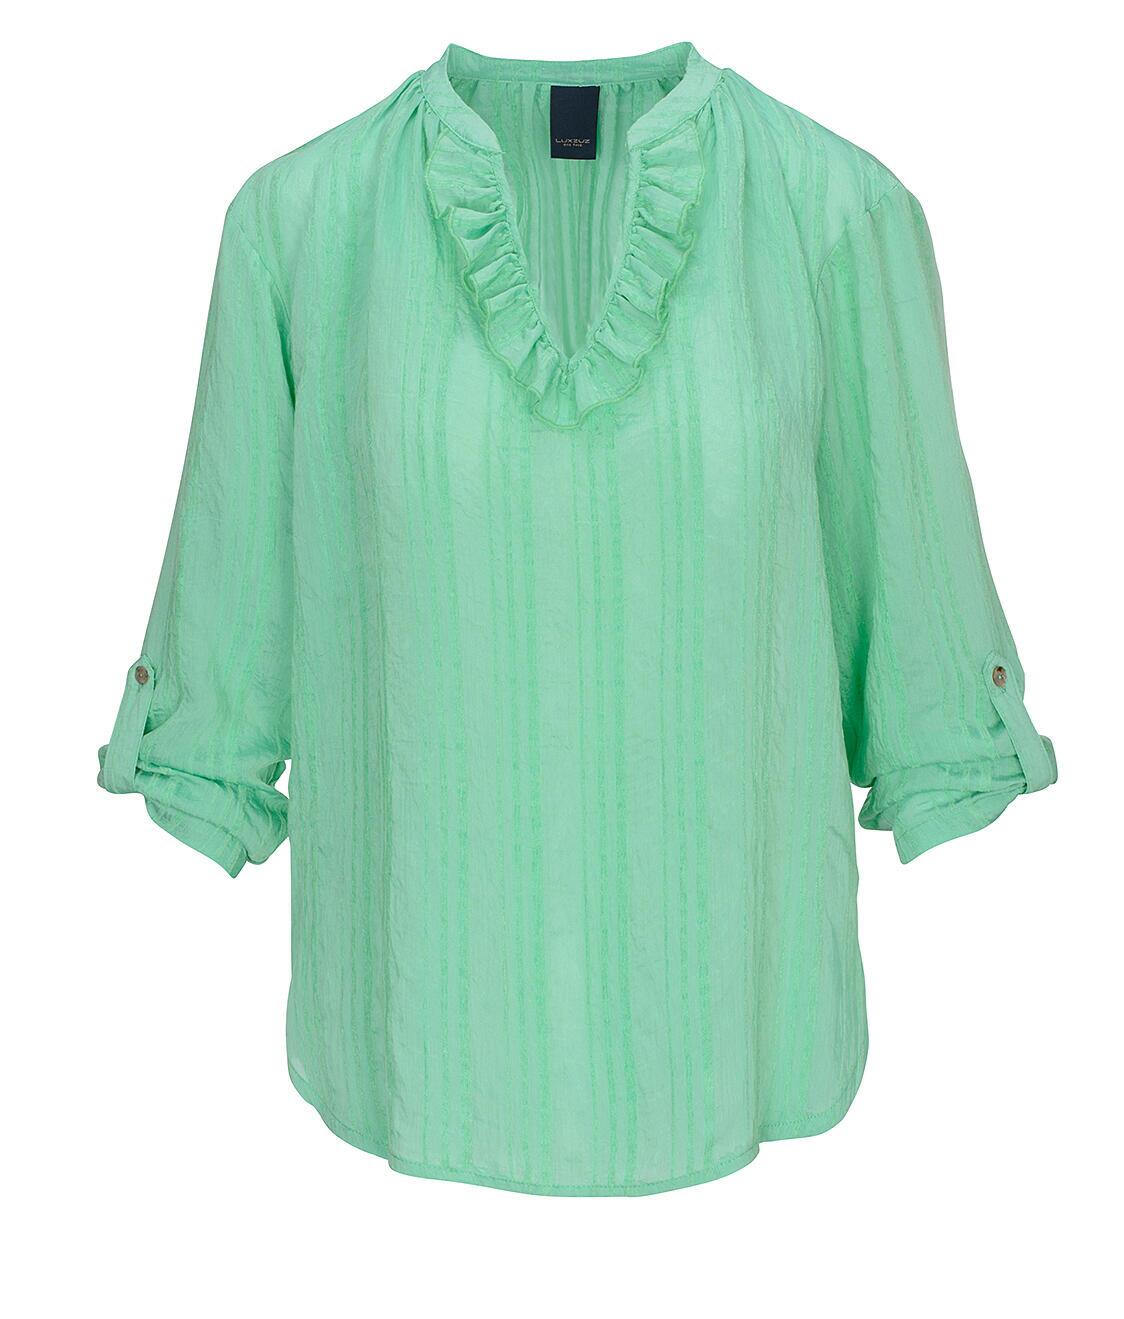 ONE TWO LUXZUZ Spearmint Oliva Bluse